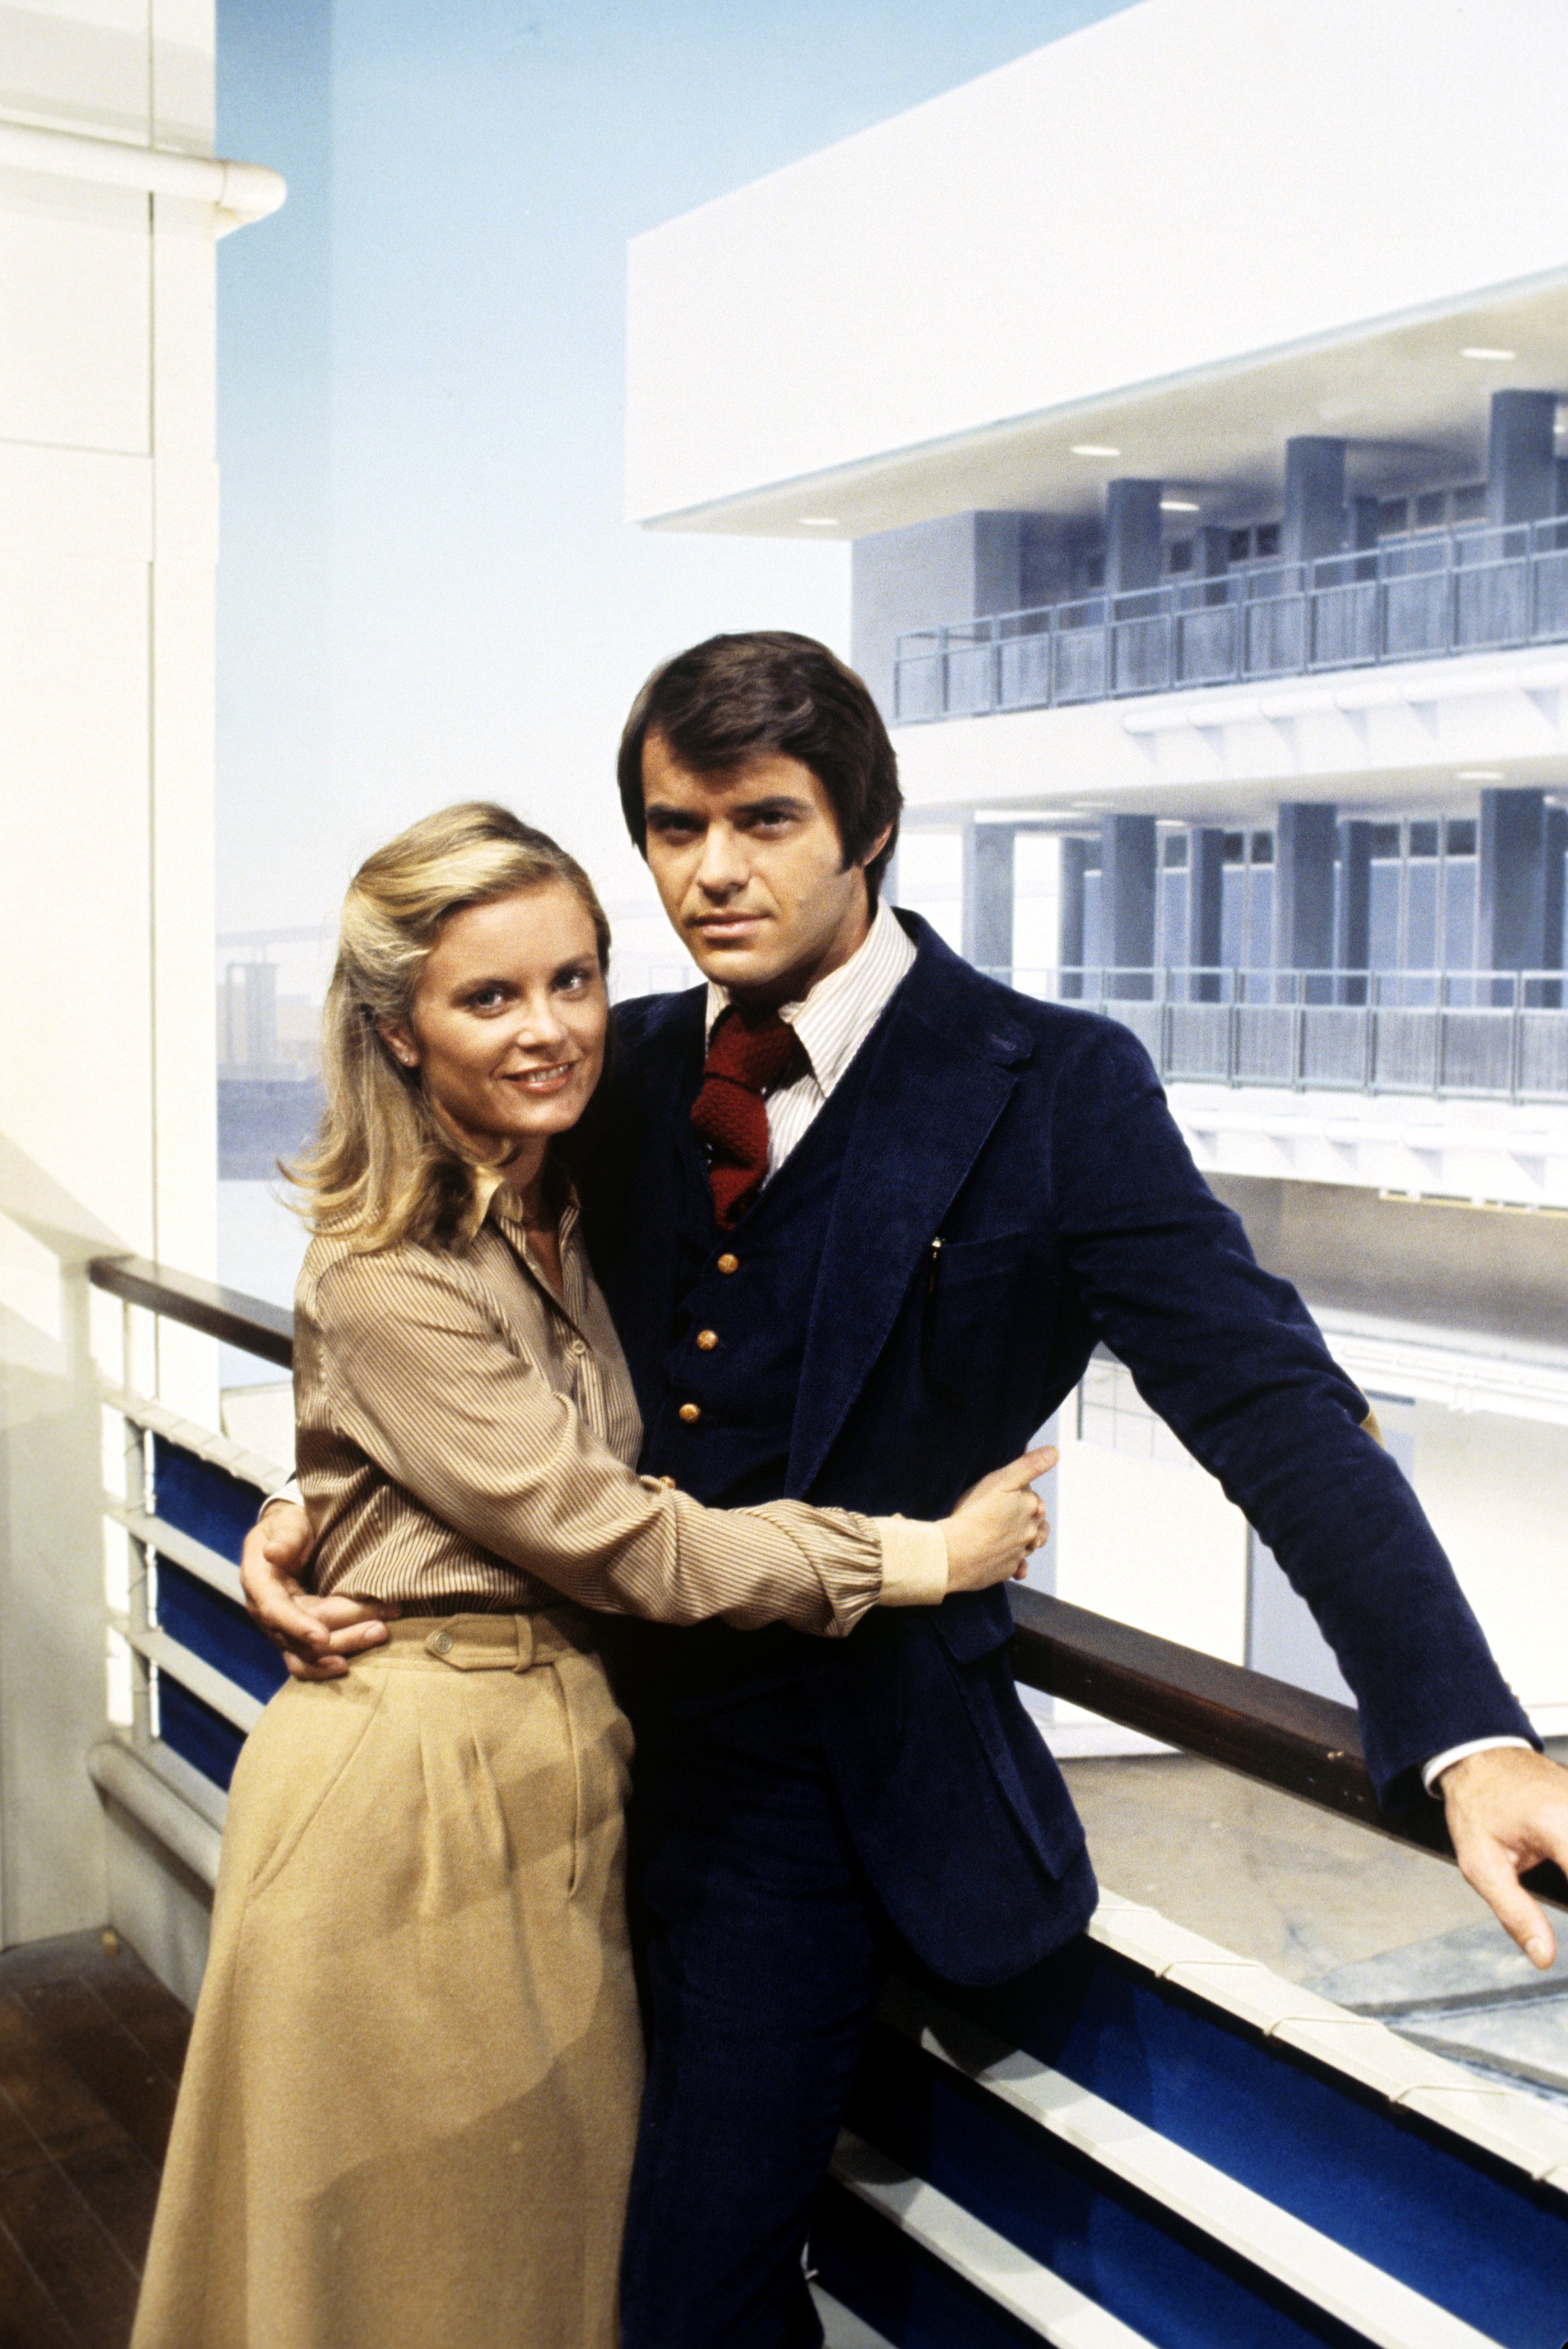 Robert Urich and Heather Menzies on the set of "The Love Boat" Season 2, USA, 1978 | Source: Getty Images